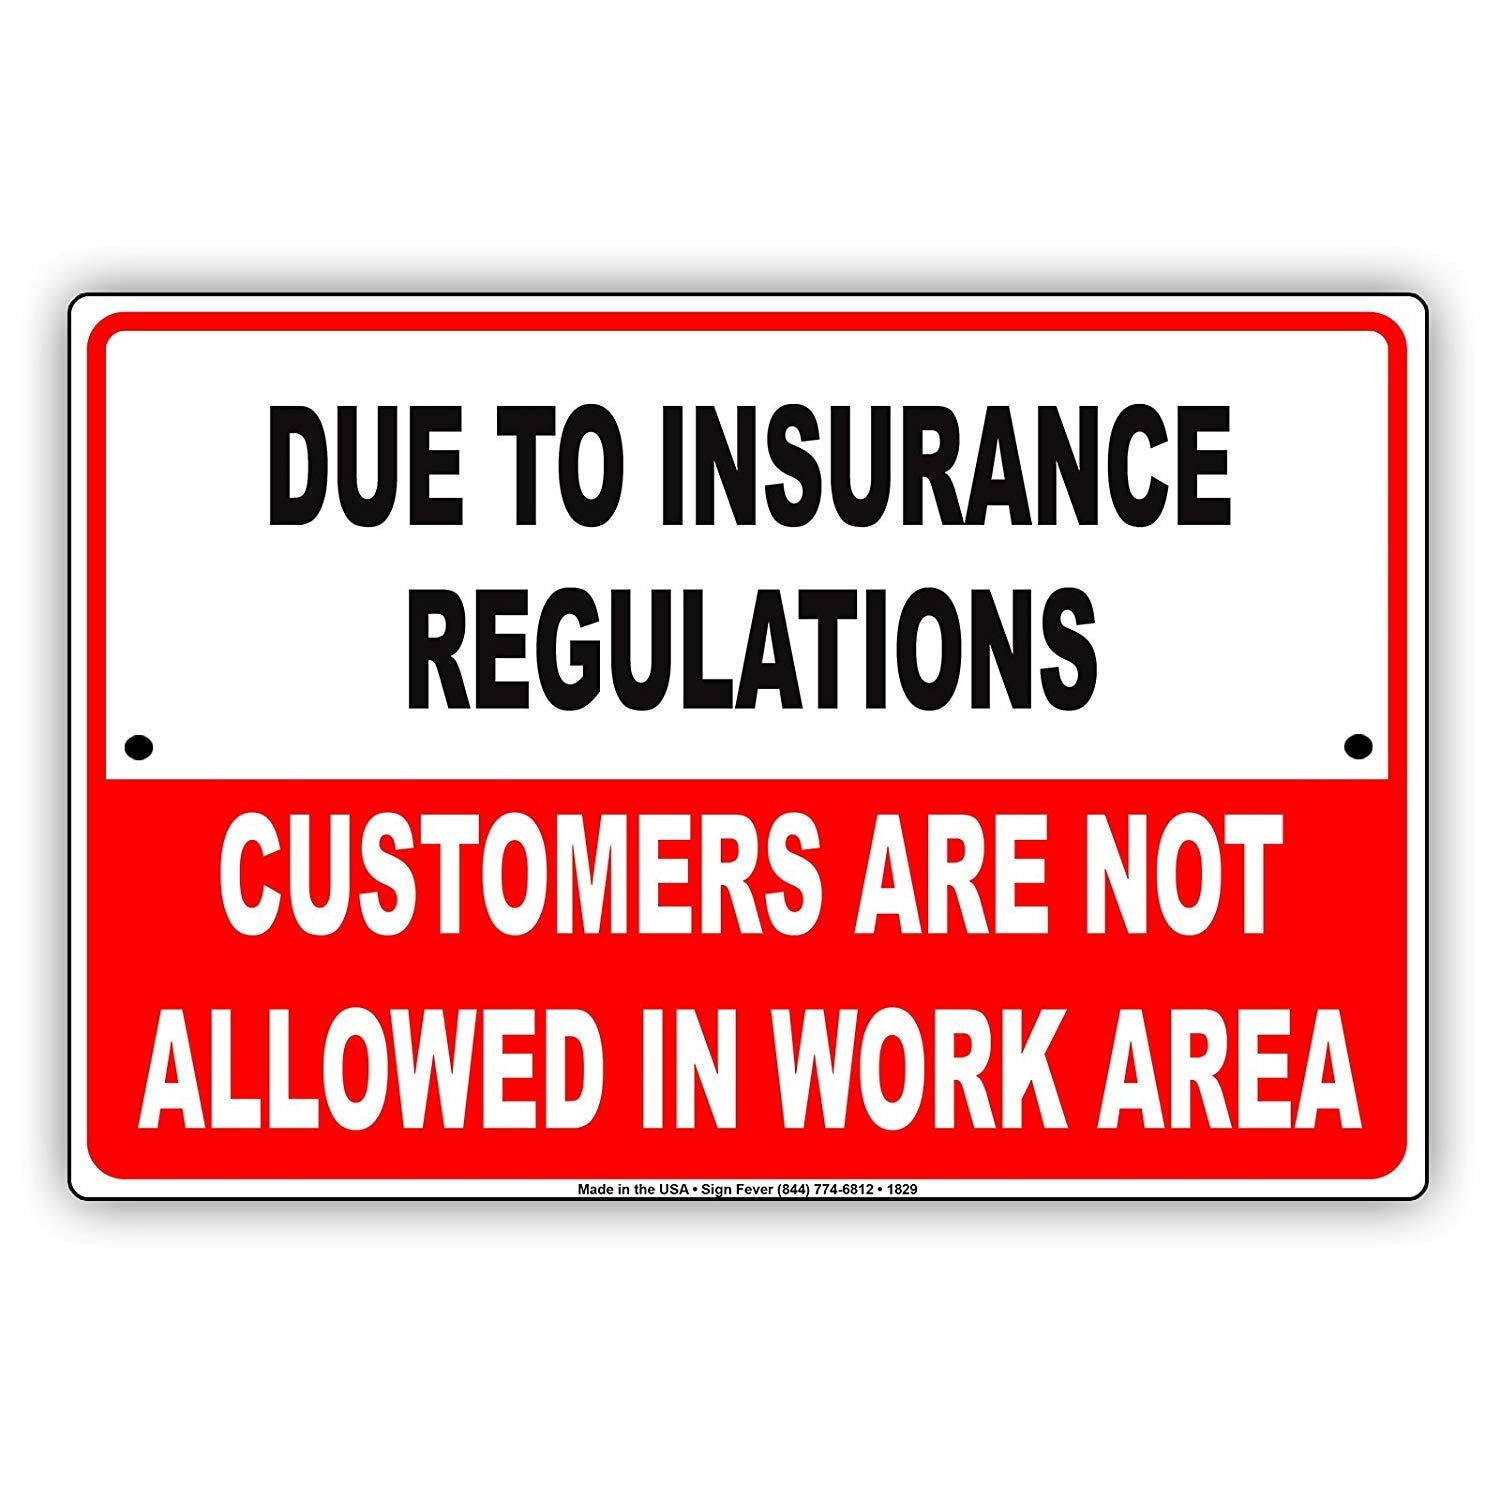 Warning Sign Due to Insurance Regulations Customers Not Allowed in Work Area Road Sign Business Sign 8X12 Inches Aluminum Metal